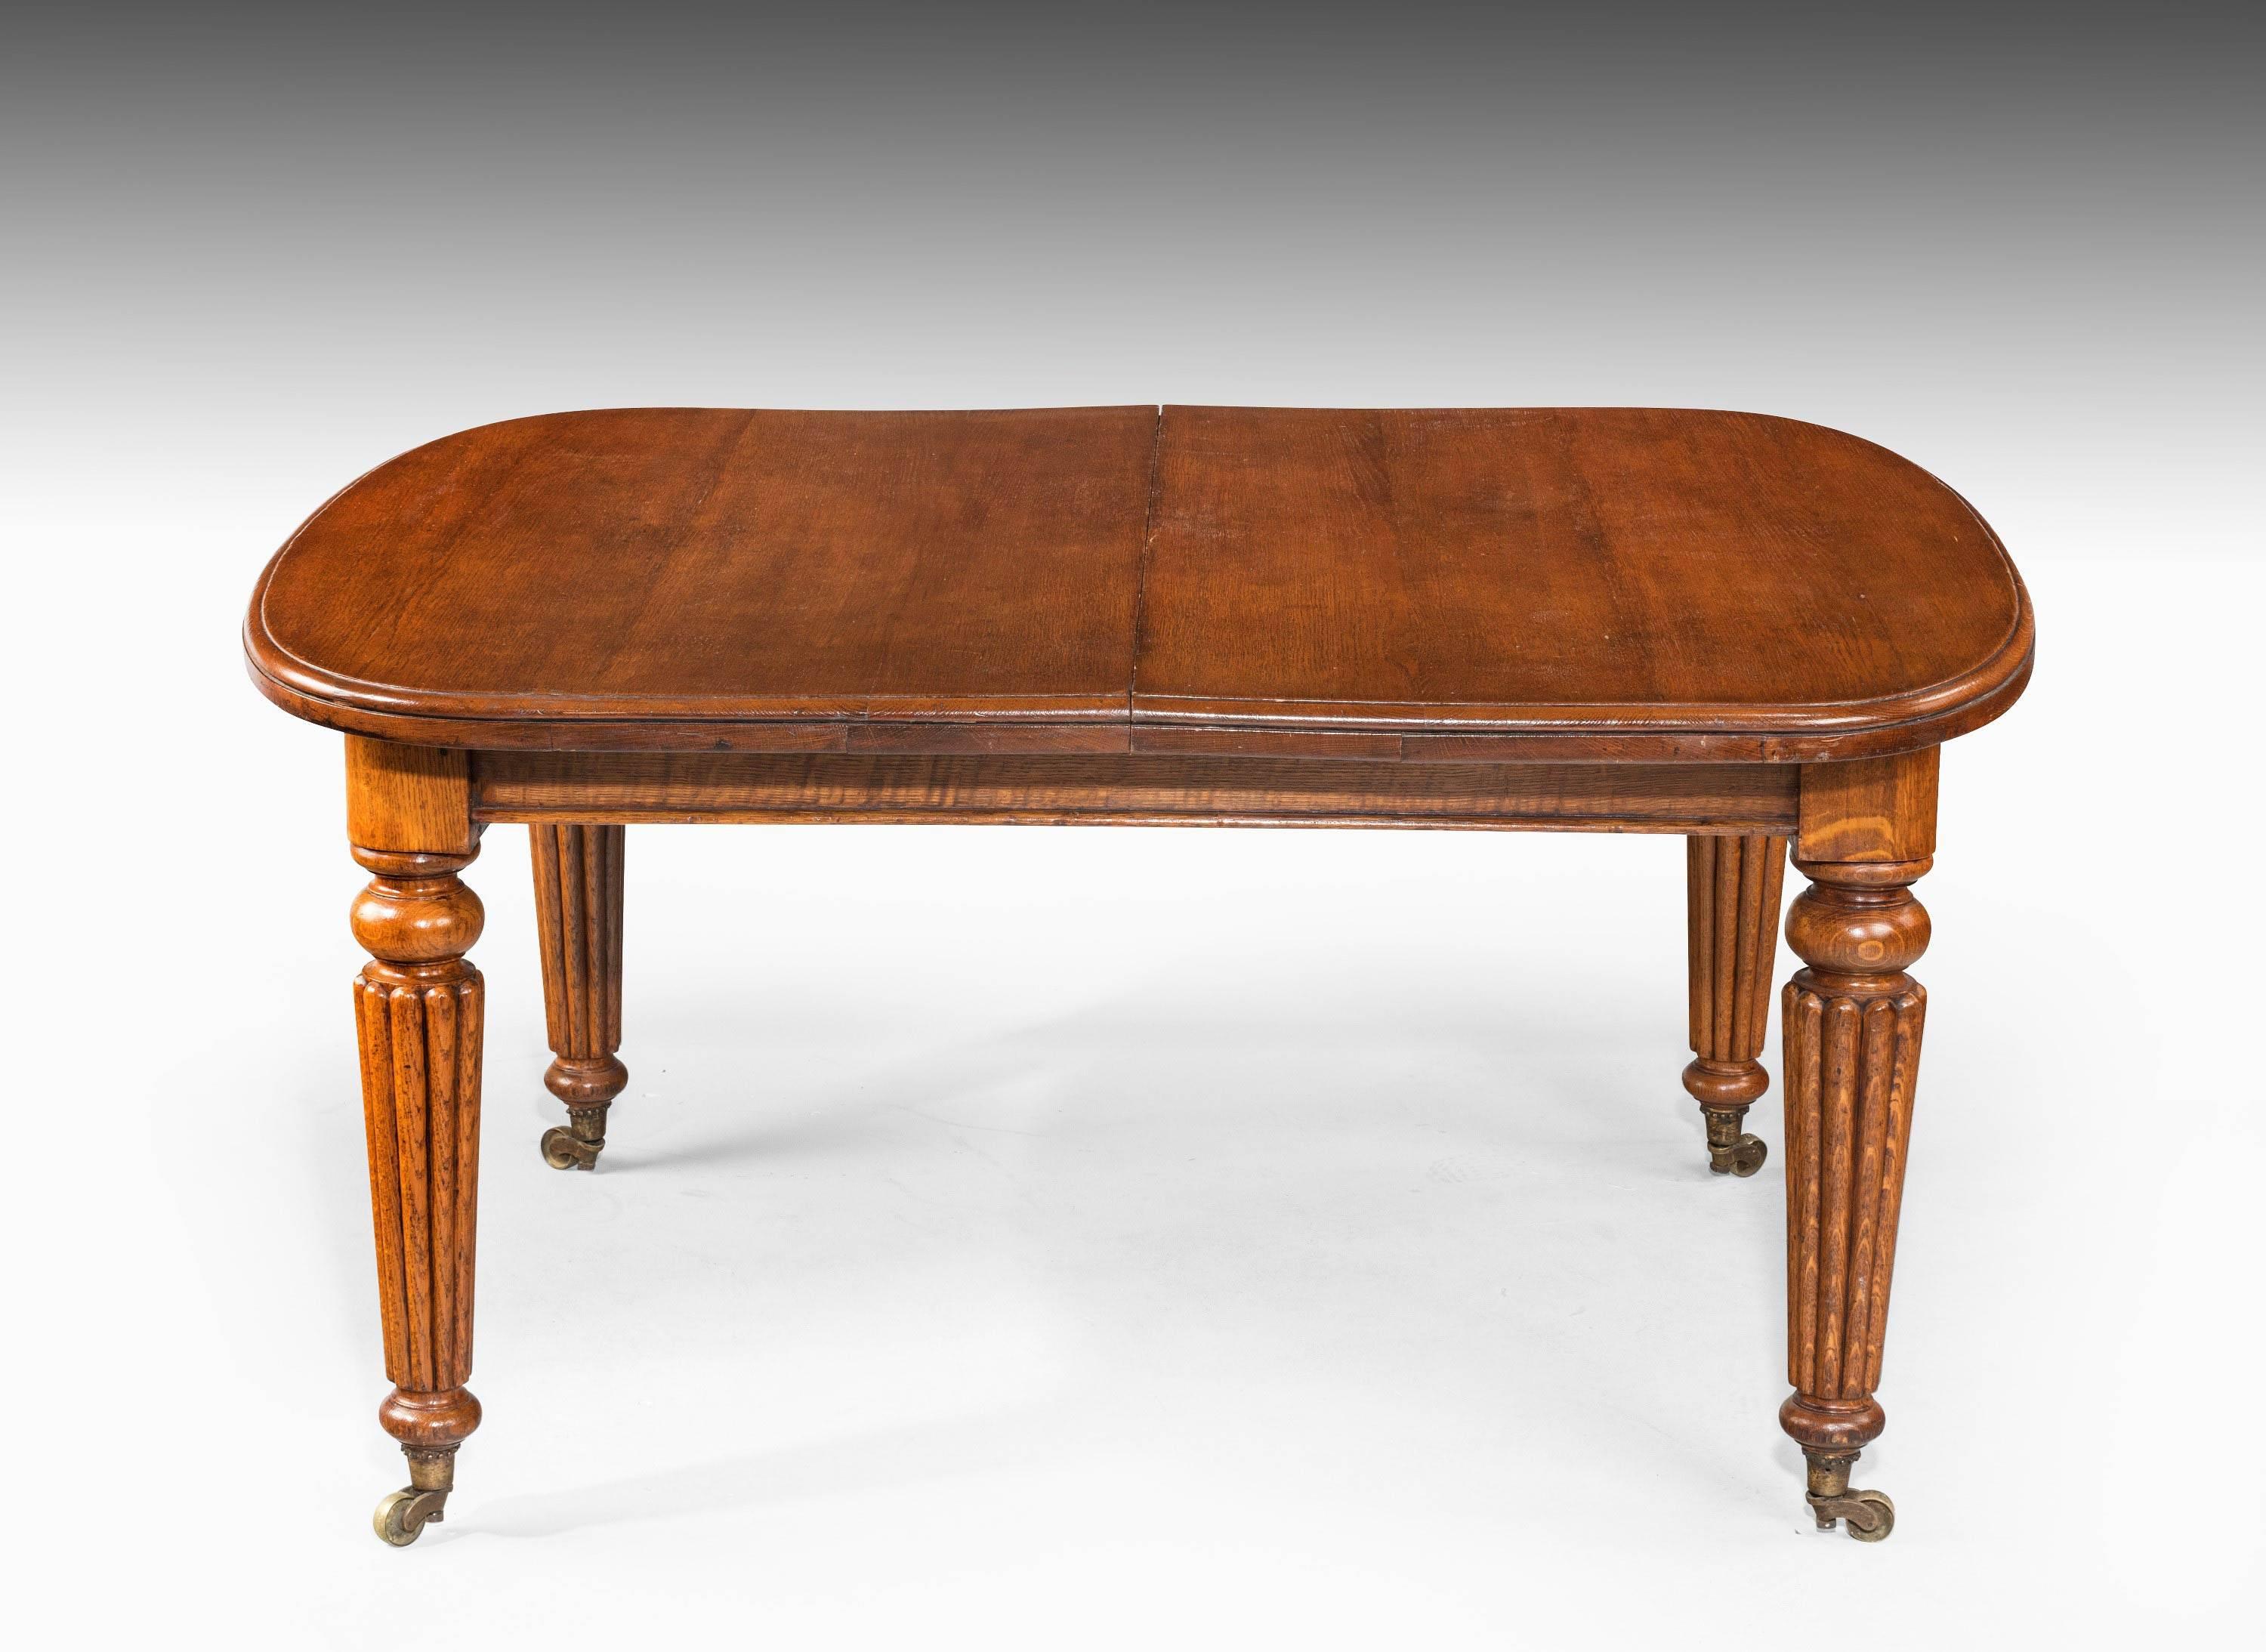 Late Regency Period Mahogany Extending Dining Table with Reeded Decoration In Excellent Condition In Peterborough, Northamptonshire